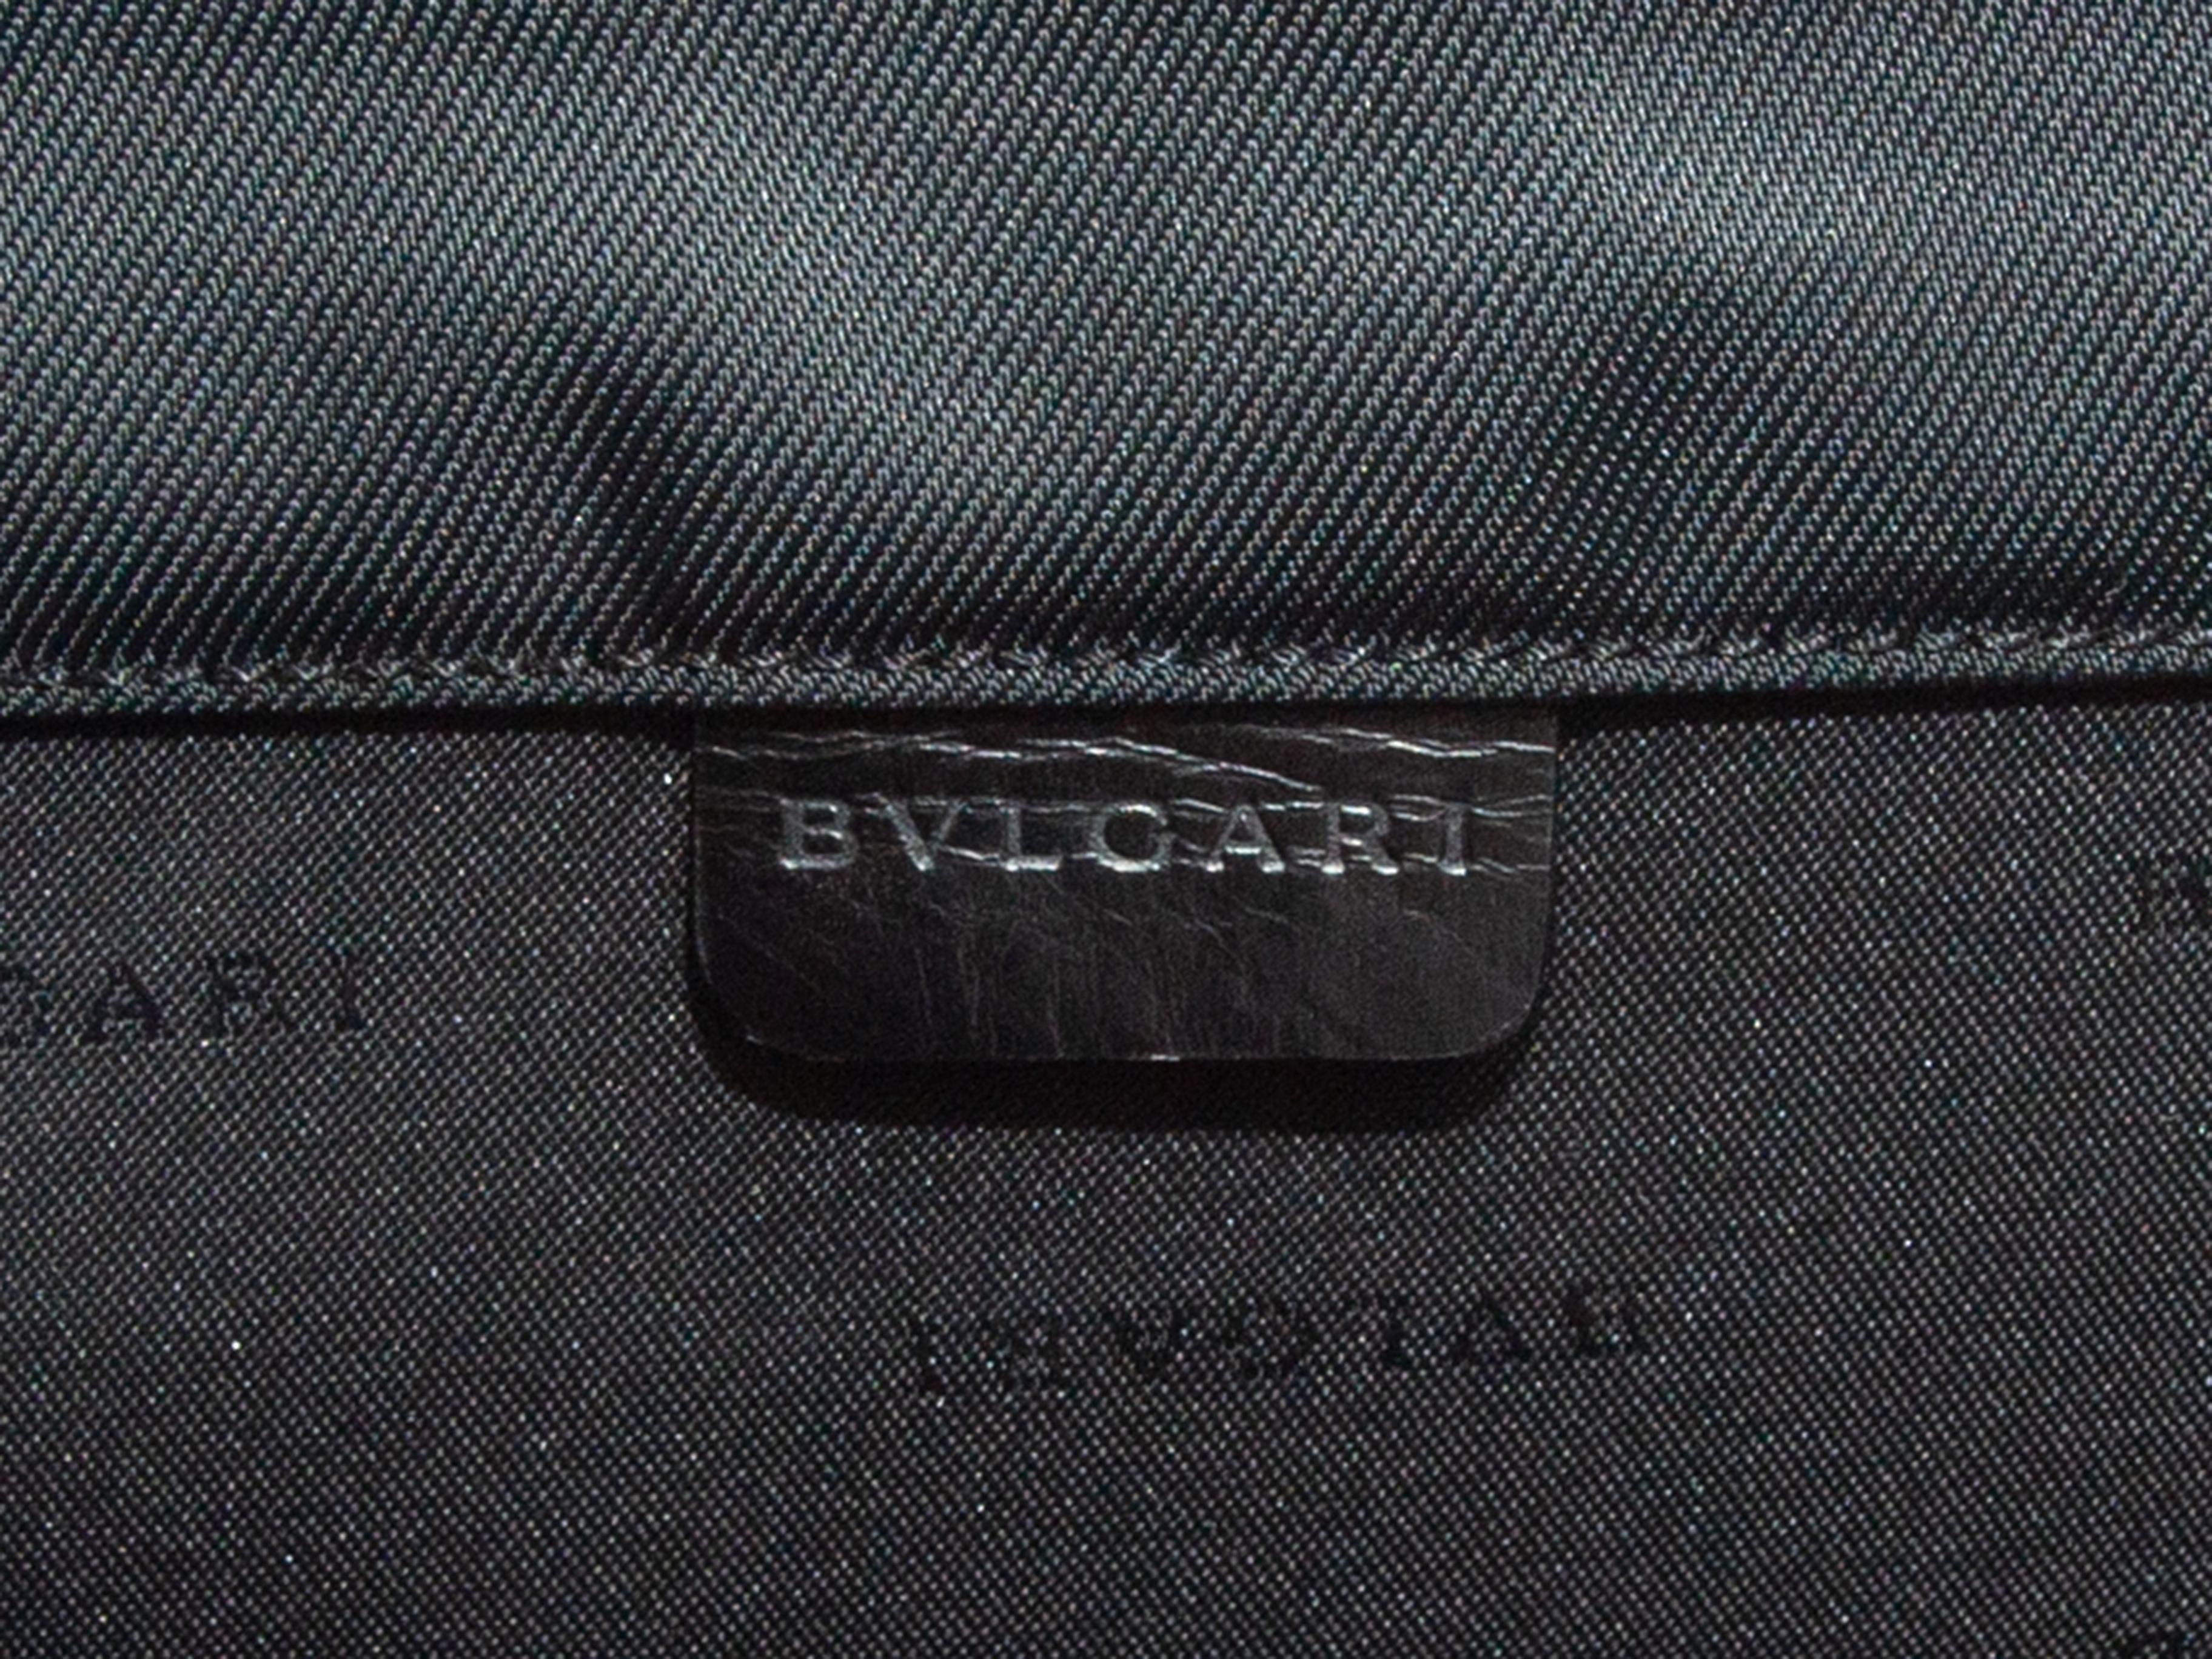 Product details: Black leather and nylon briefcase by Bvlgari. Silver-tone hardware. Single top handle. Dual turn-lock closures at front flap. 14